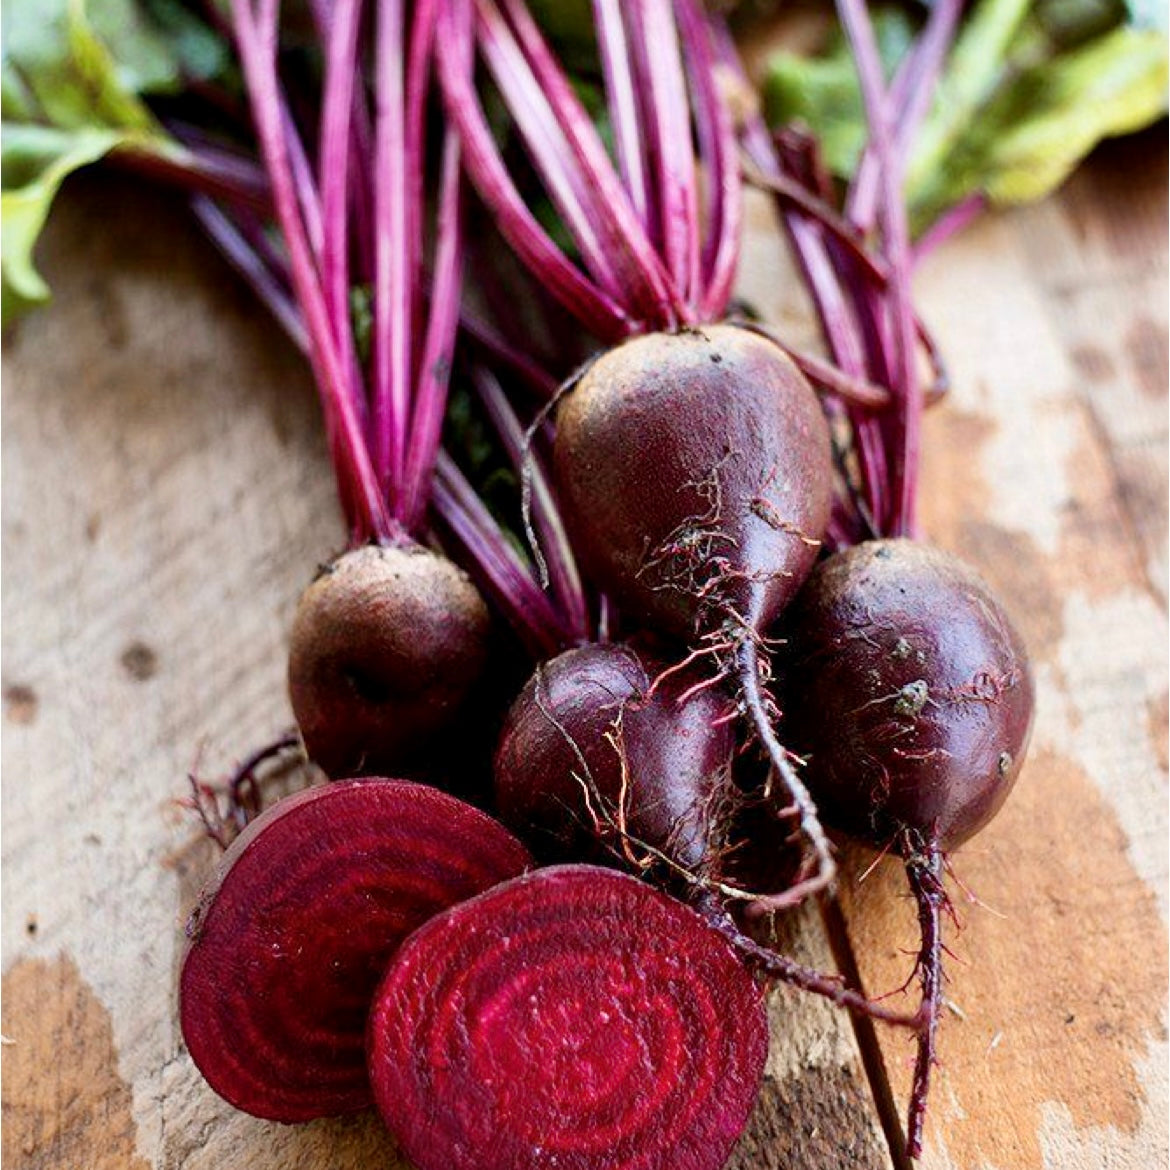 Leafy Bunched Beetroot